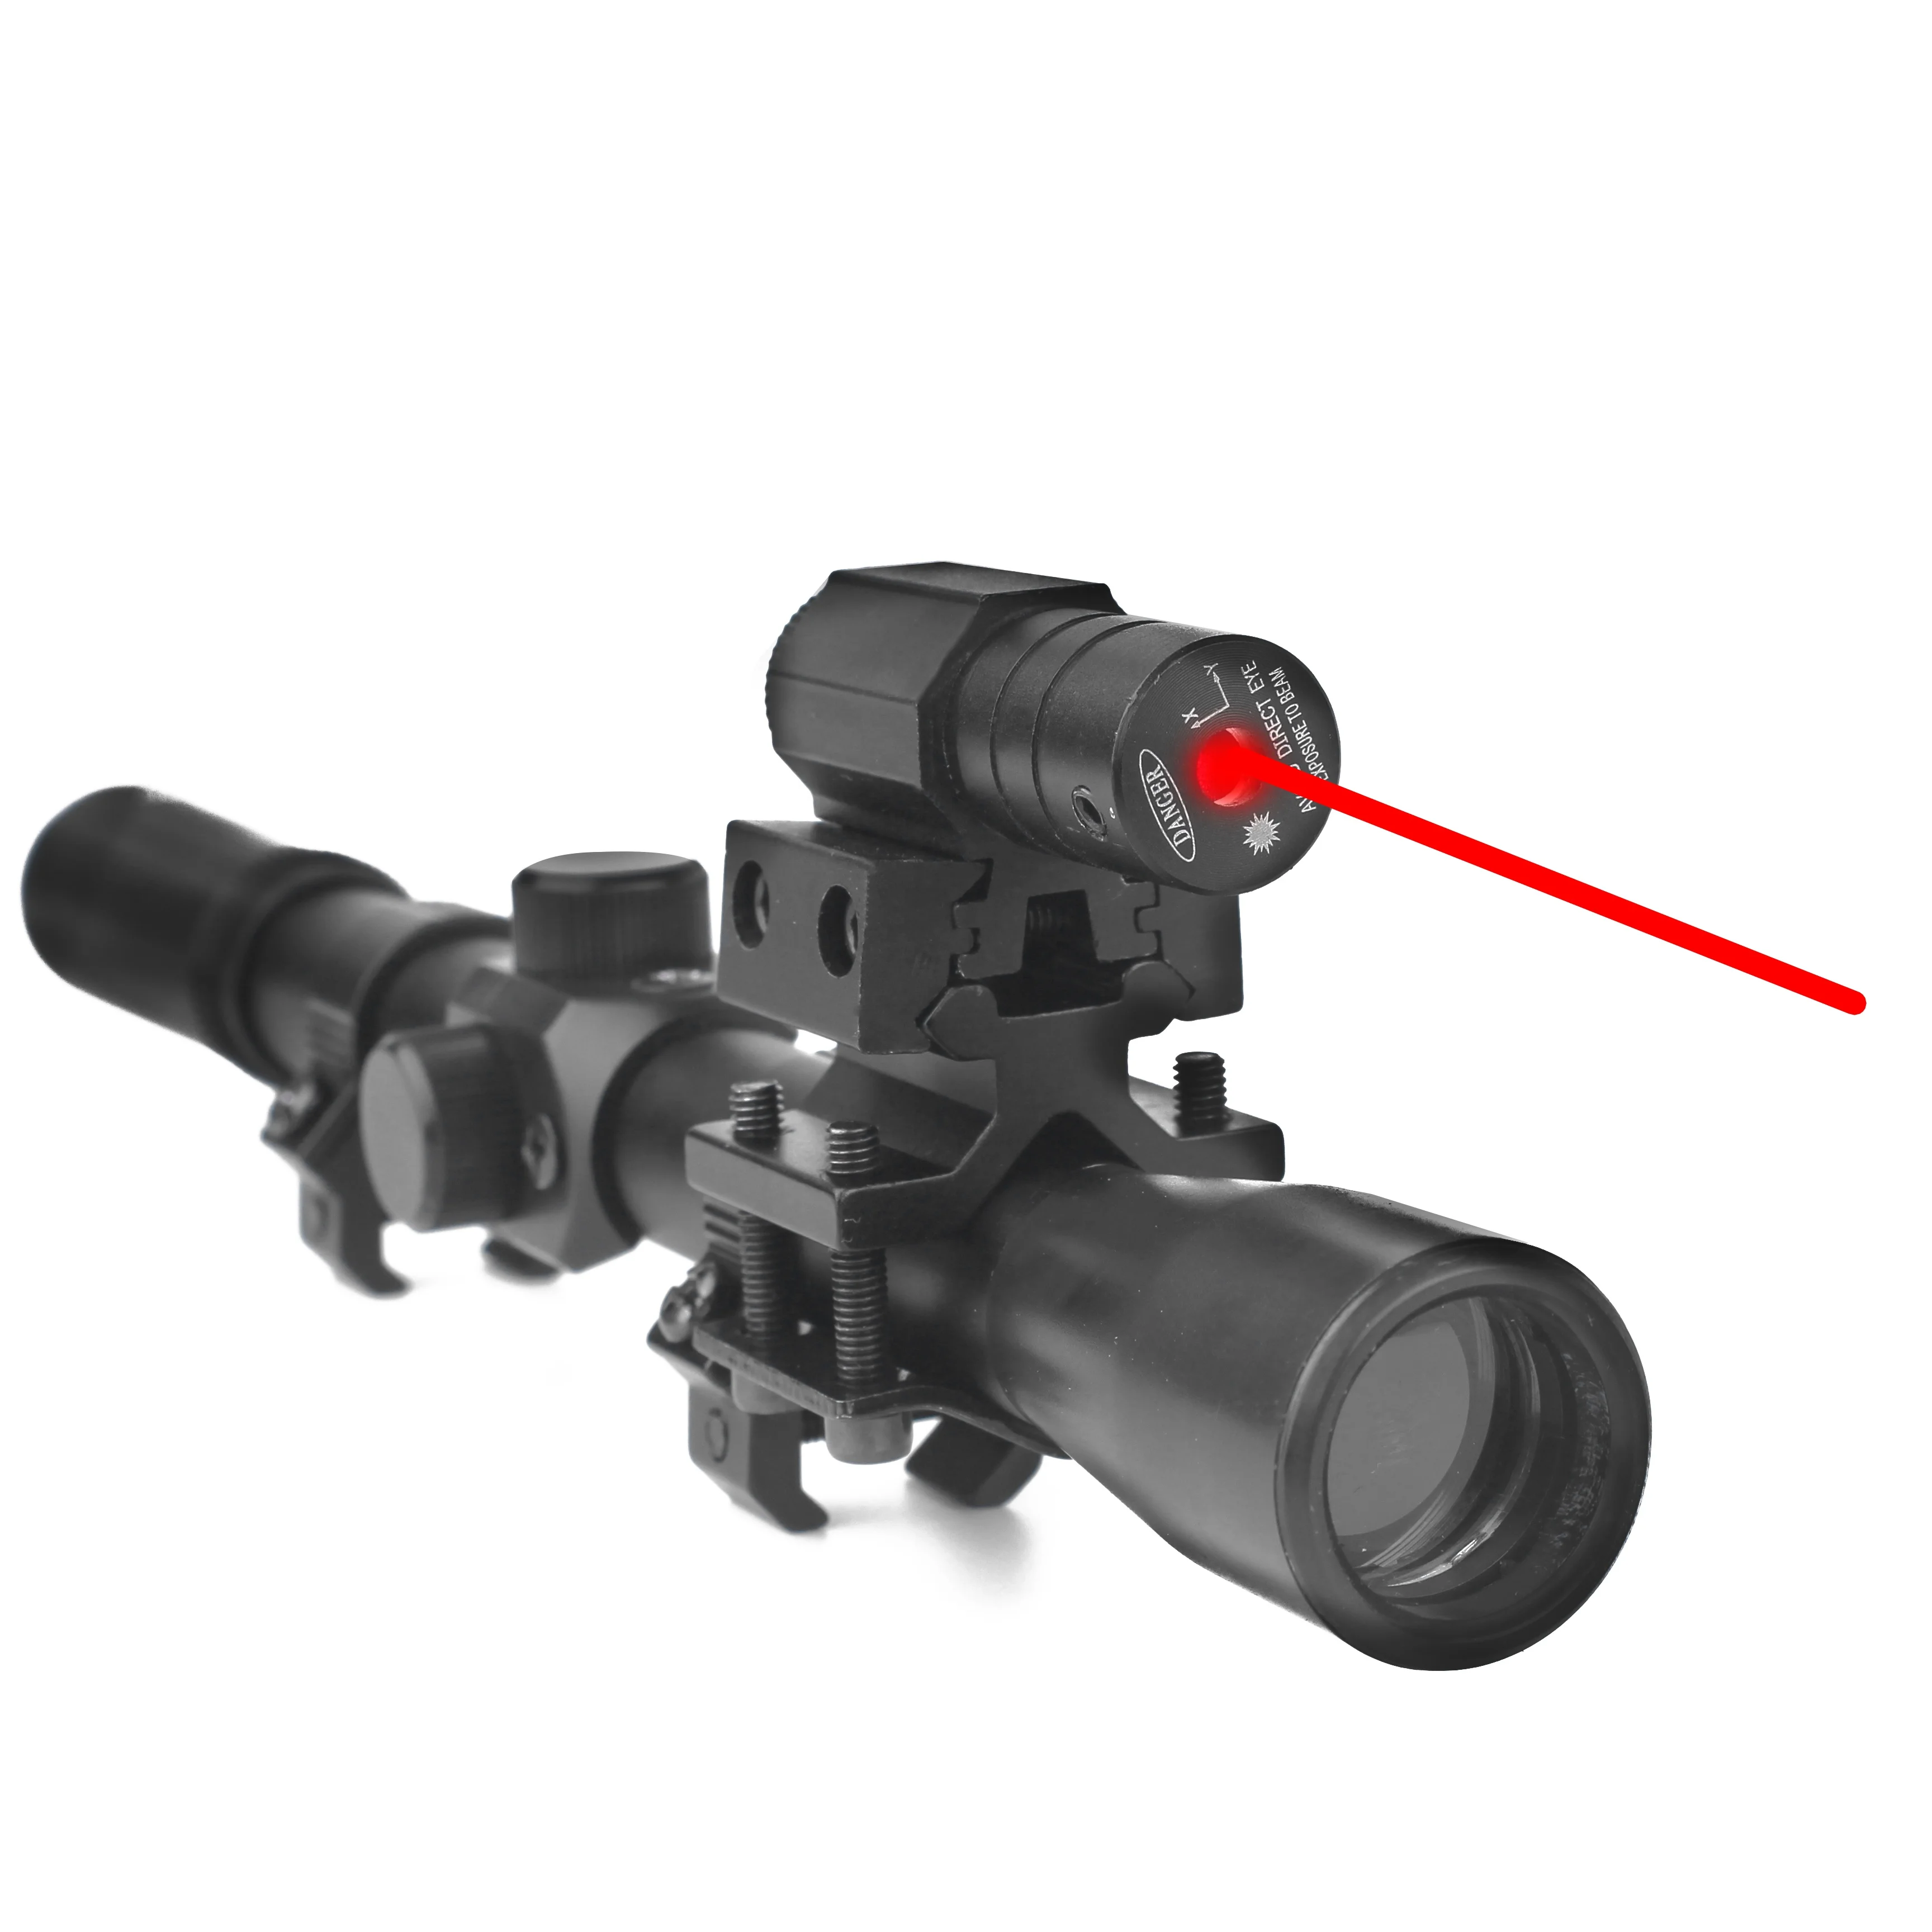 

LUGER 4x20 Optics Scope Tactical Crossbow Combo Sight With Red Dot Laser Sight 11mm Rail Mounts, Black